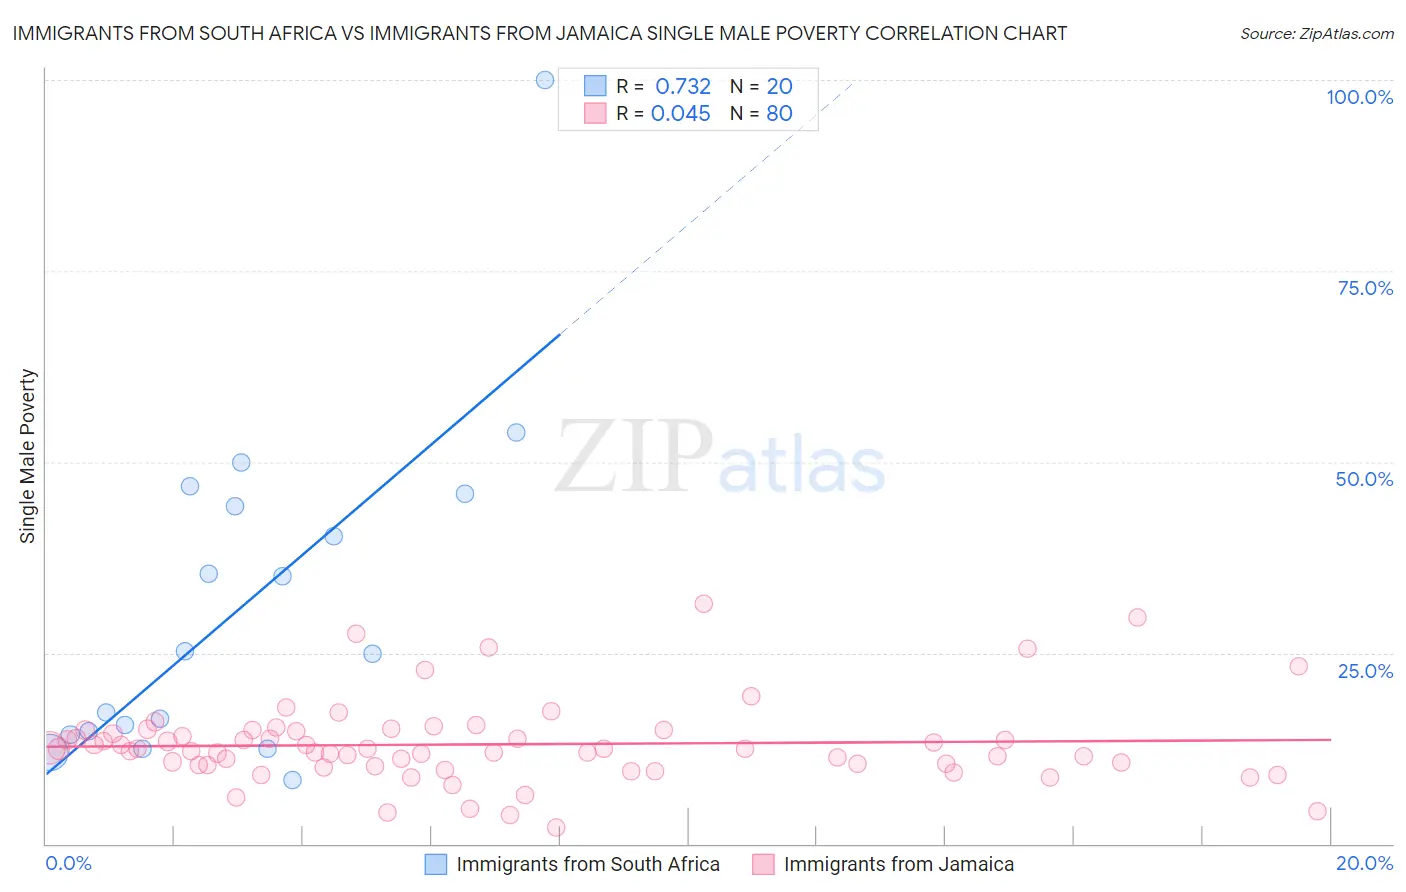 Immigrants from South Africa vs Immigrants from Jamaica Single Male Poverty